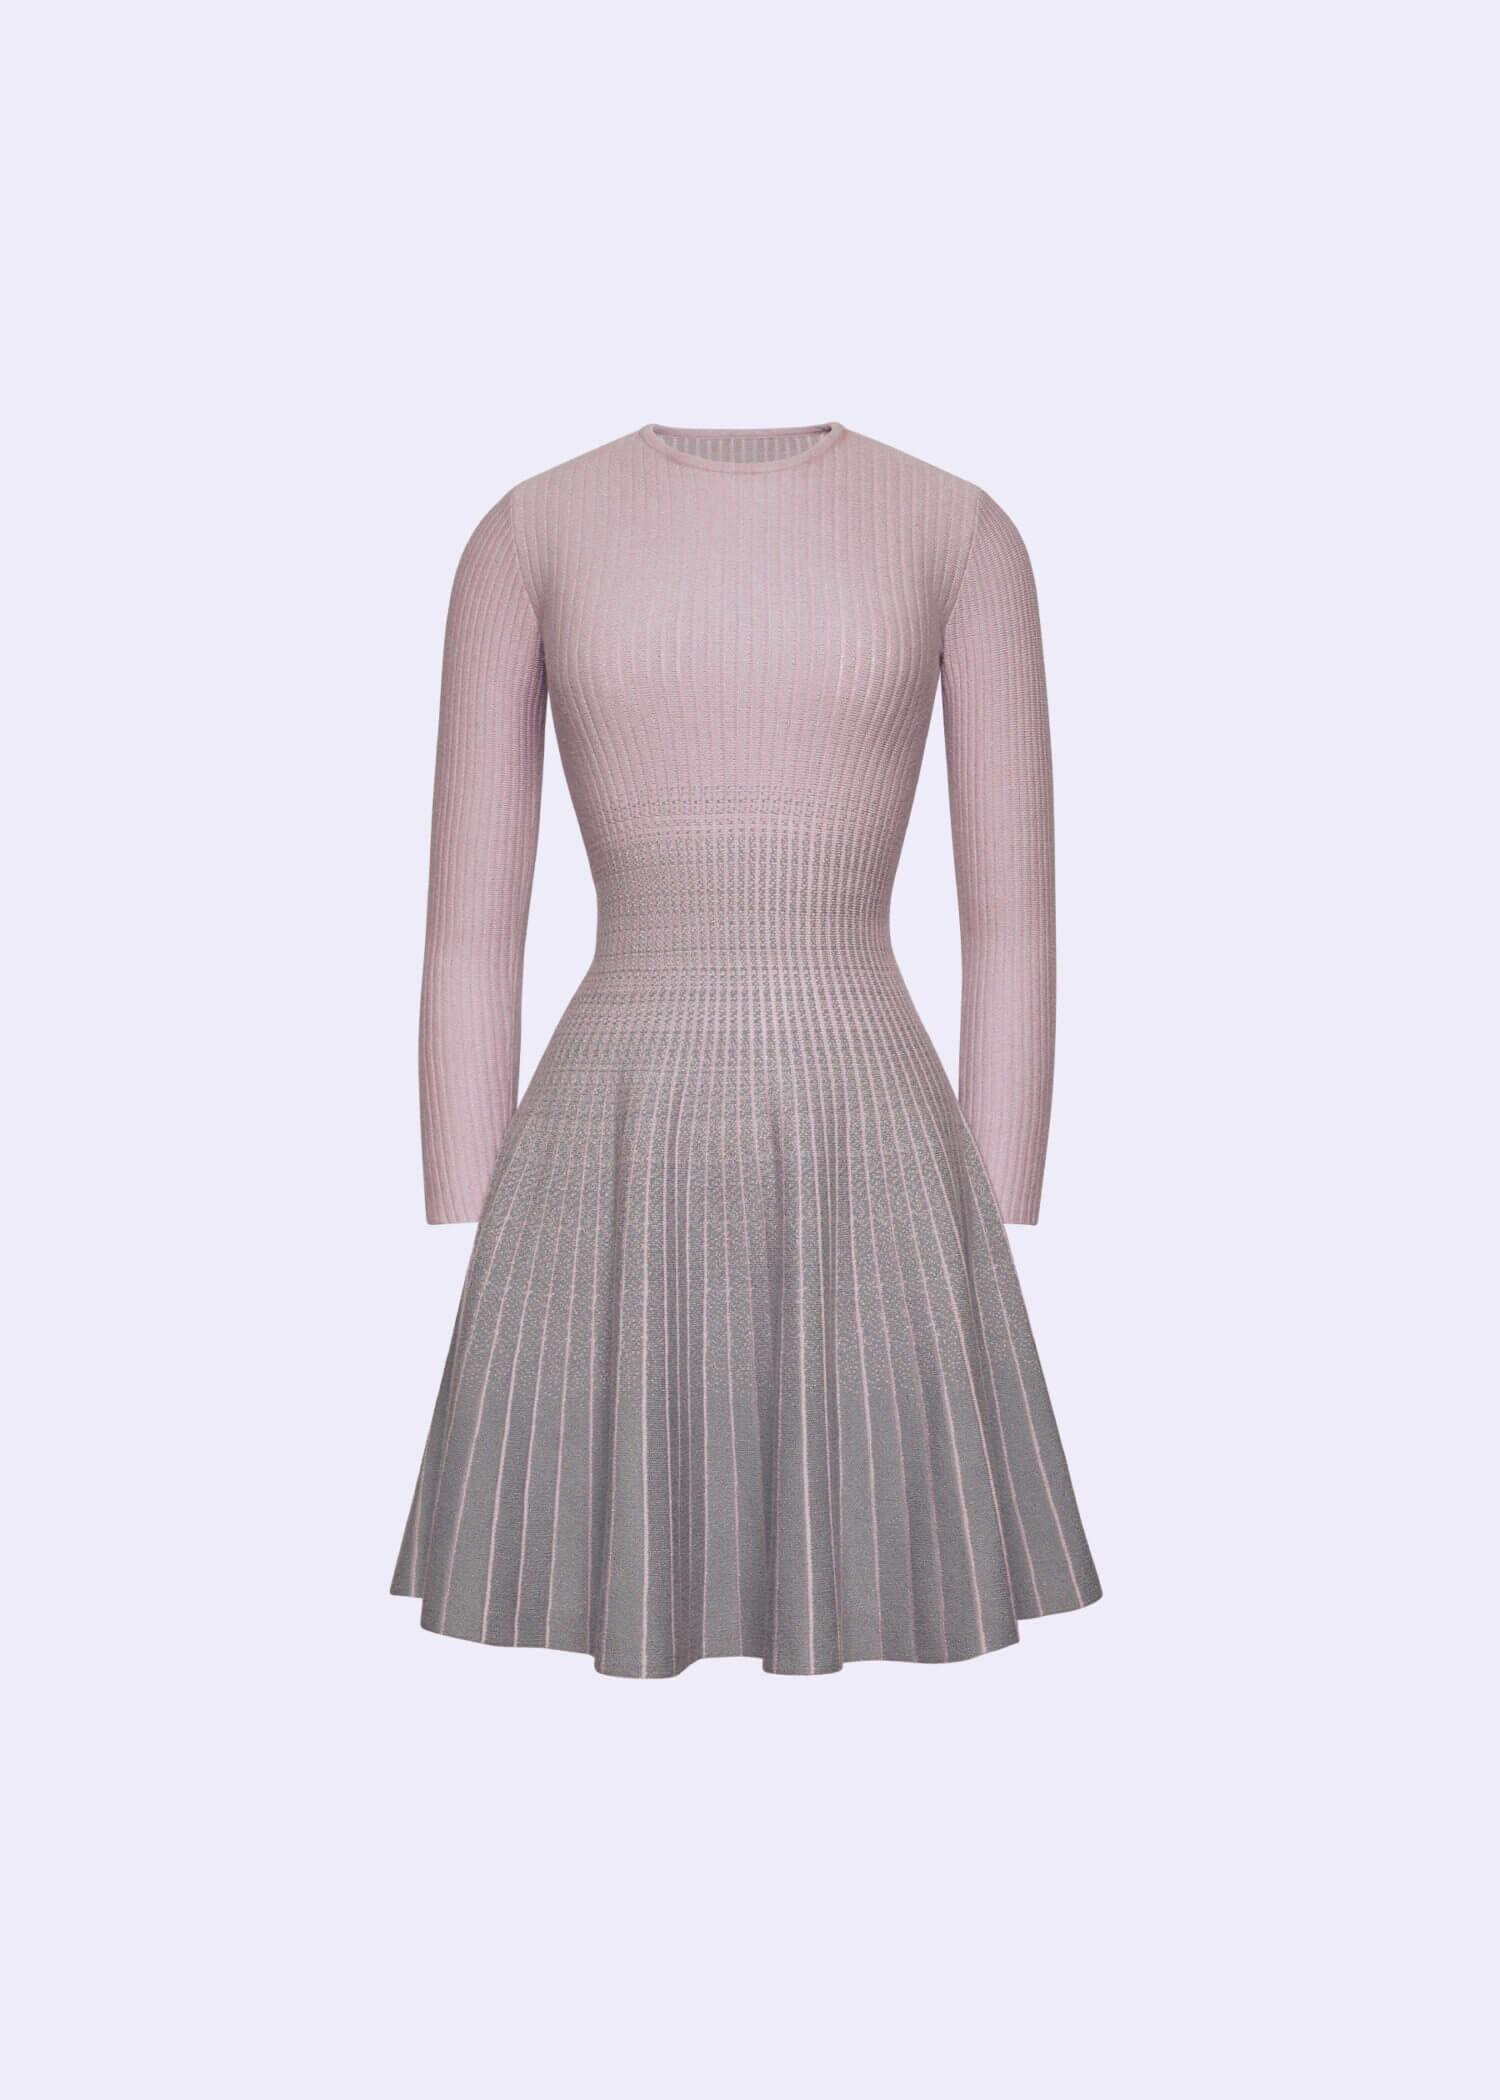 6123 Nude - Polyester Spandex Dress With Contrast Border - POEM